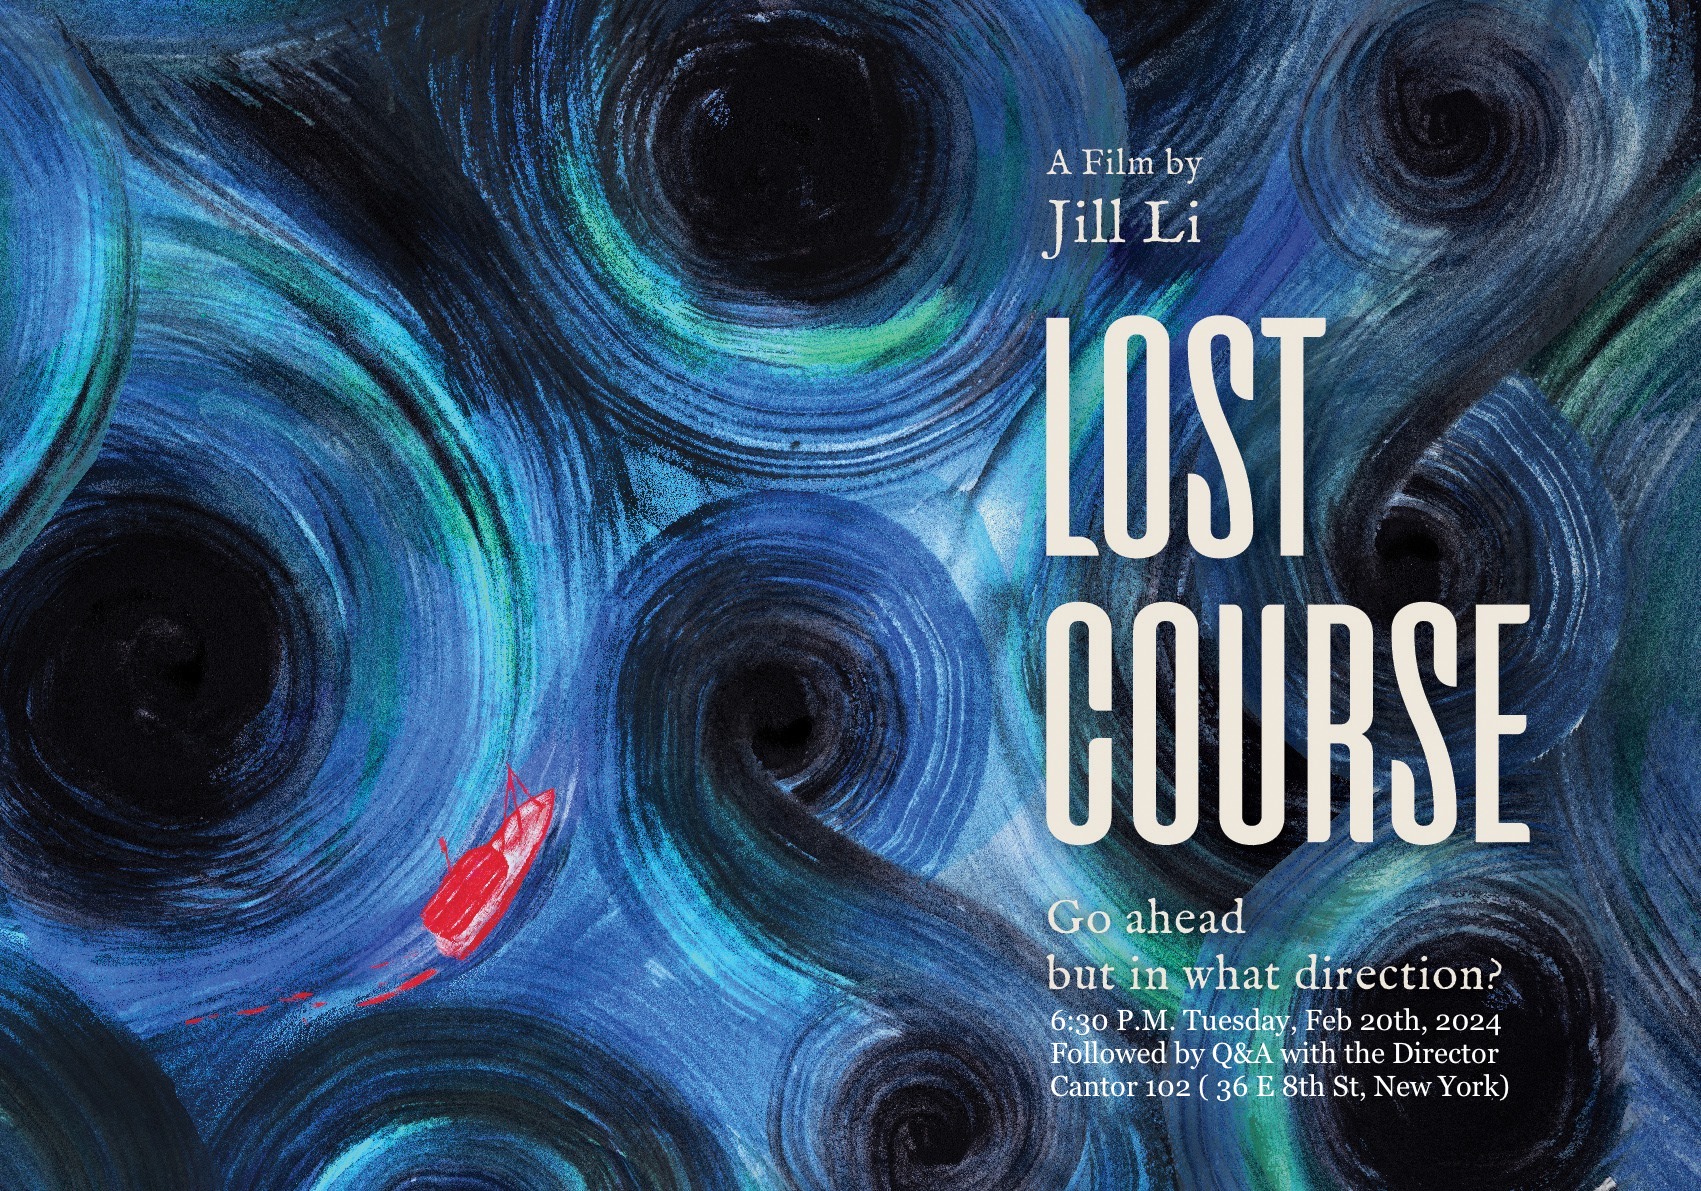 Movie poster featuring a painted red boat tracing a precarious path around deep whirlpools -- the title "LOST COURSE" appears, with the subtitle "Go ahead - but in what direction?" Details below!